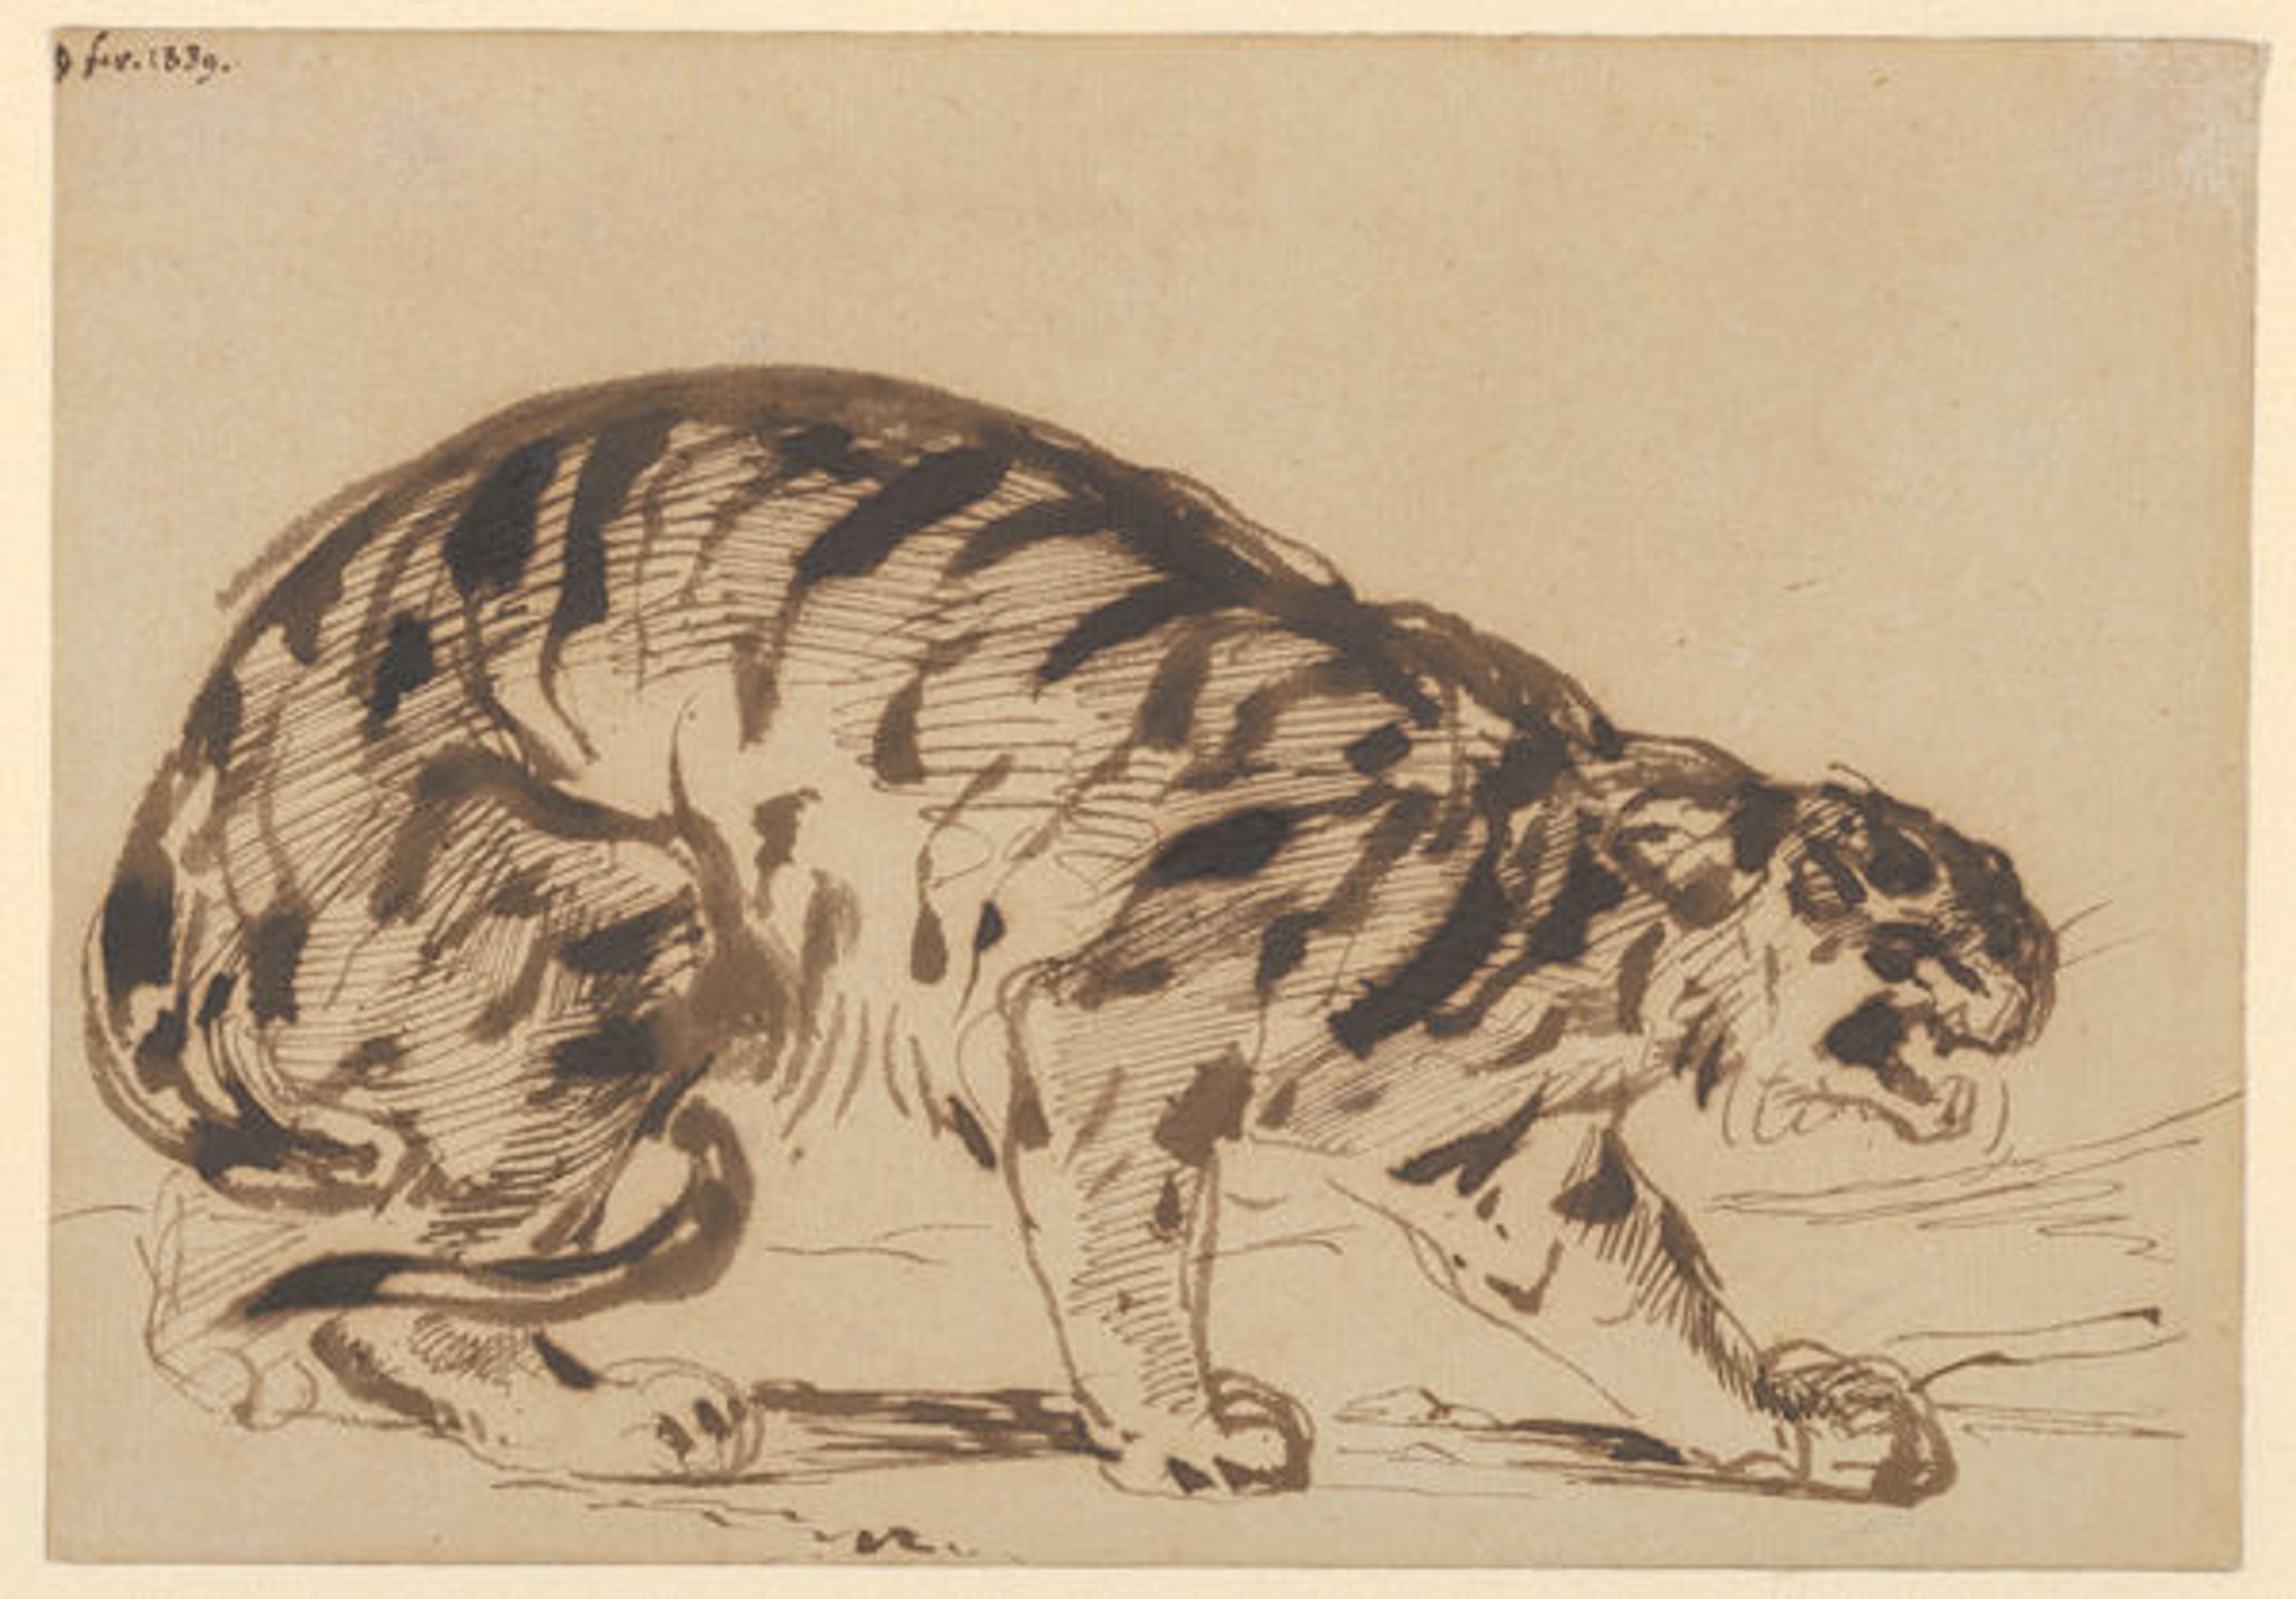 Eugène Delacroix (French, 1798–1863) | Crouching Tiger, 1839 | The Metropolitan Museum of Art, New York, Gift from the Karen B. Cohen Collection of Eugène Delacroix, in honor of Sanford I. Weill, 2013 (2013.1135.5)